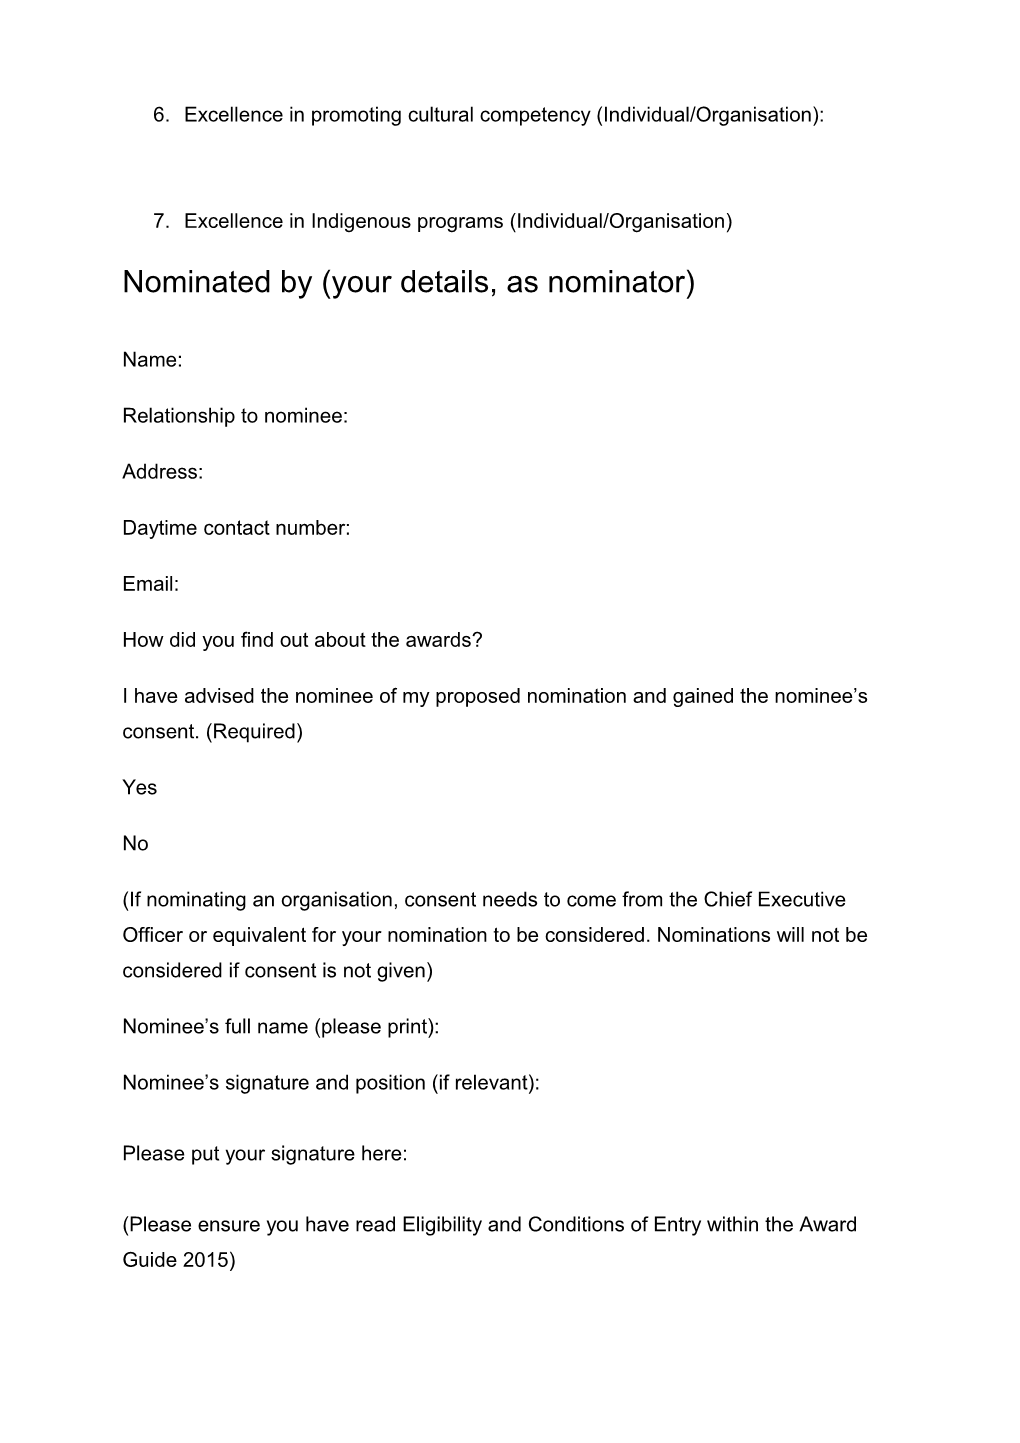 Are You Nominating an Individual Or an Organisation?